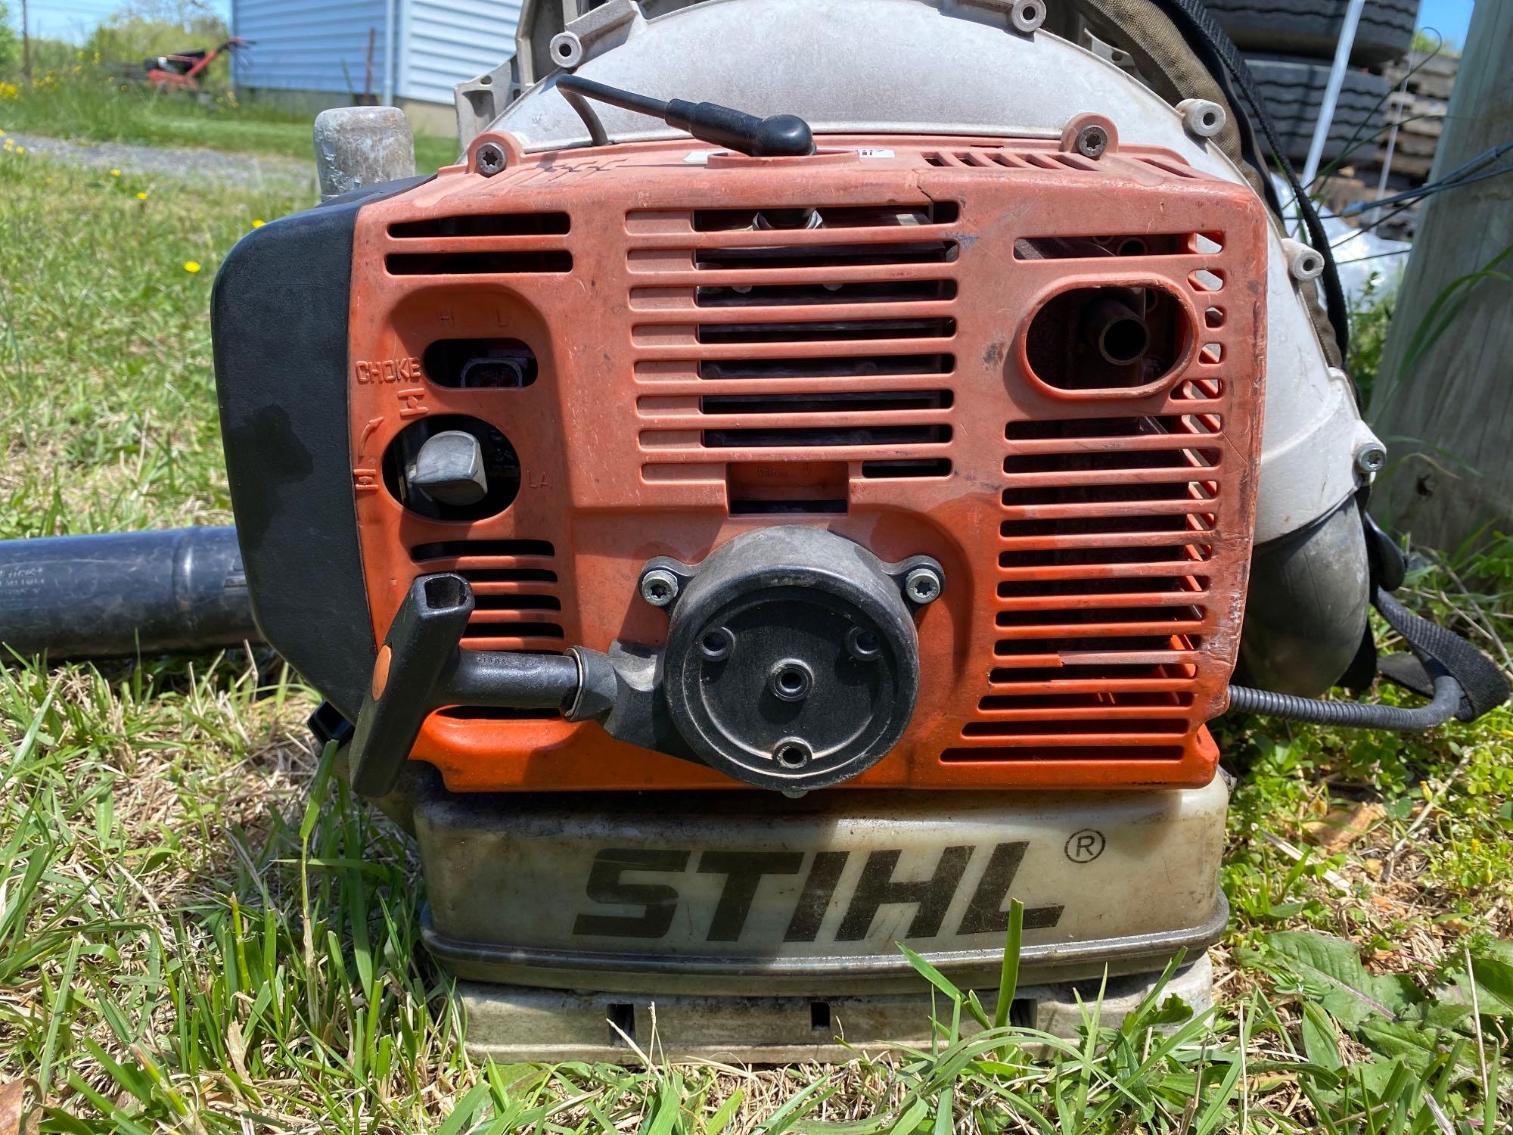 Image for Stihl Backpack Blower- per seller- runs out well